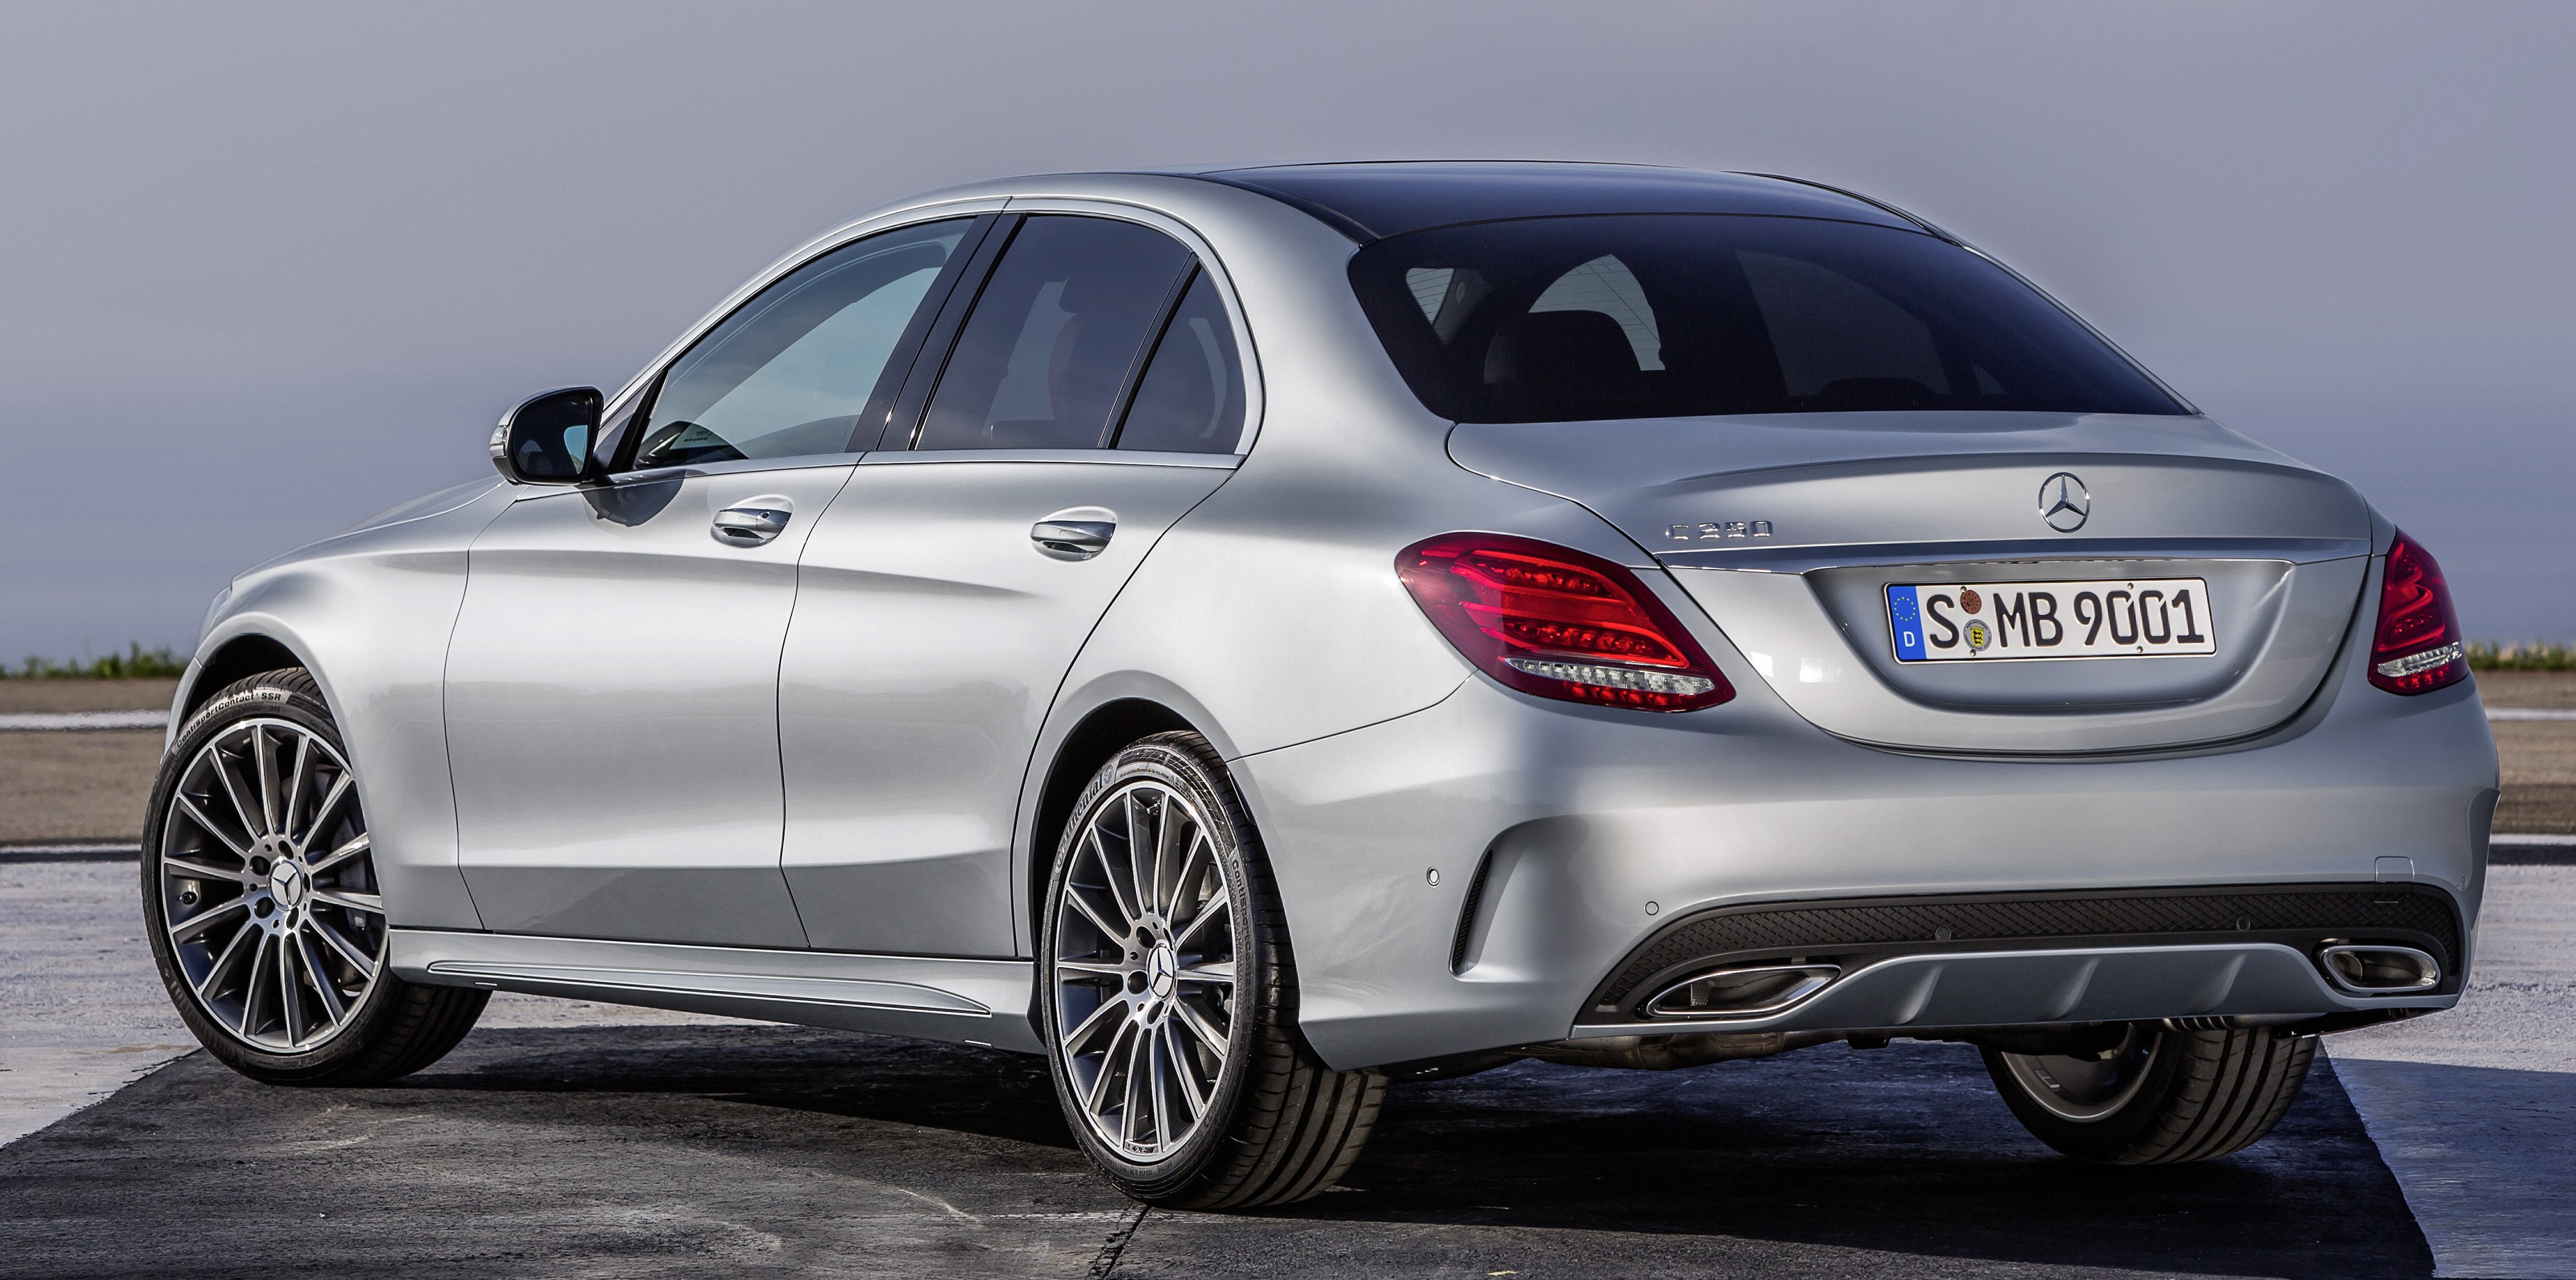 2015 Mercedes-Benz C-Class: Luxury Compact Gets Bigger, Stronger | The  Daily Drive | Consumer Guide® The Daily Drive | Consumer Guide®